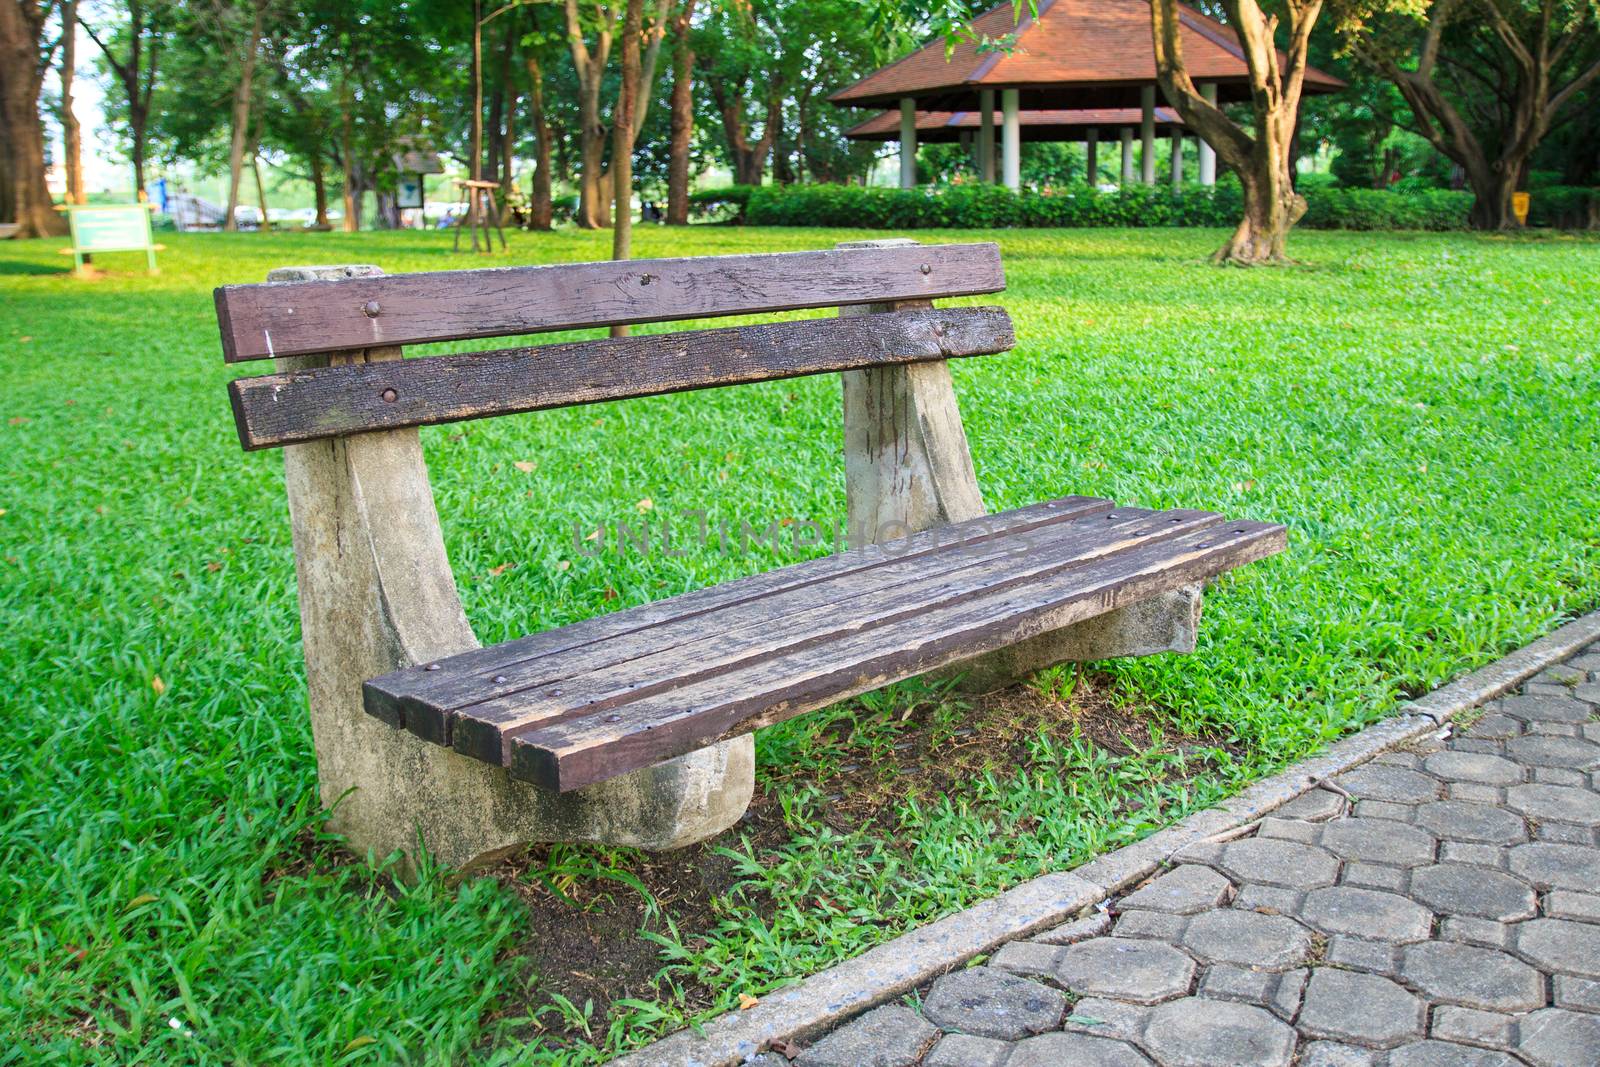 Bench under the tree in the park